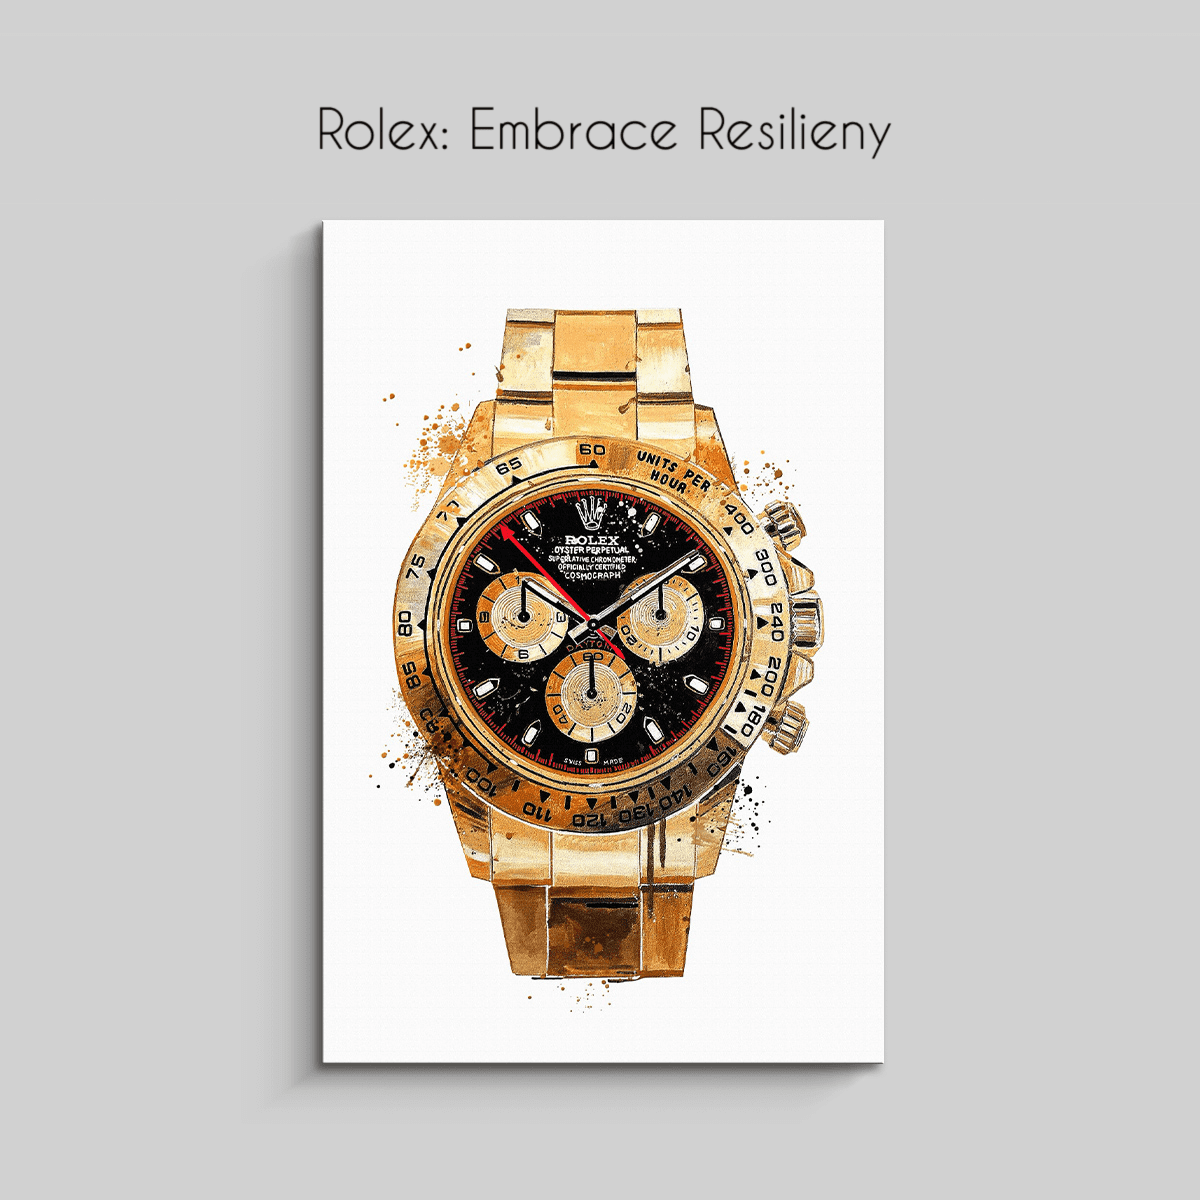 Rolex: Embrace Resilience